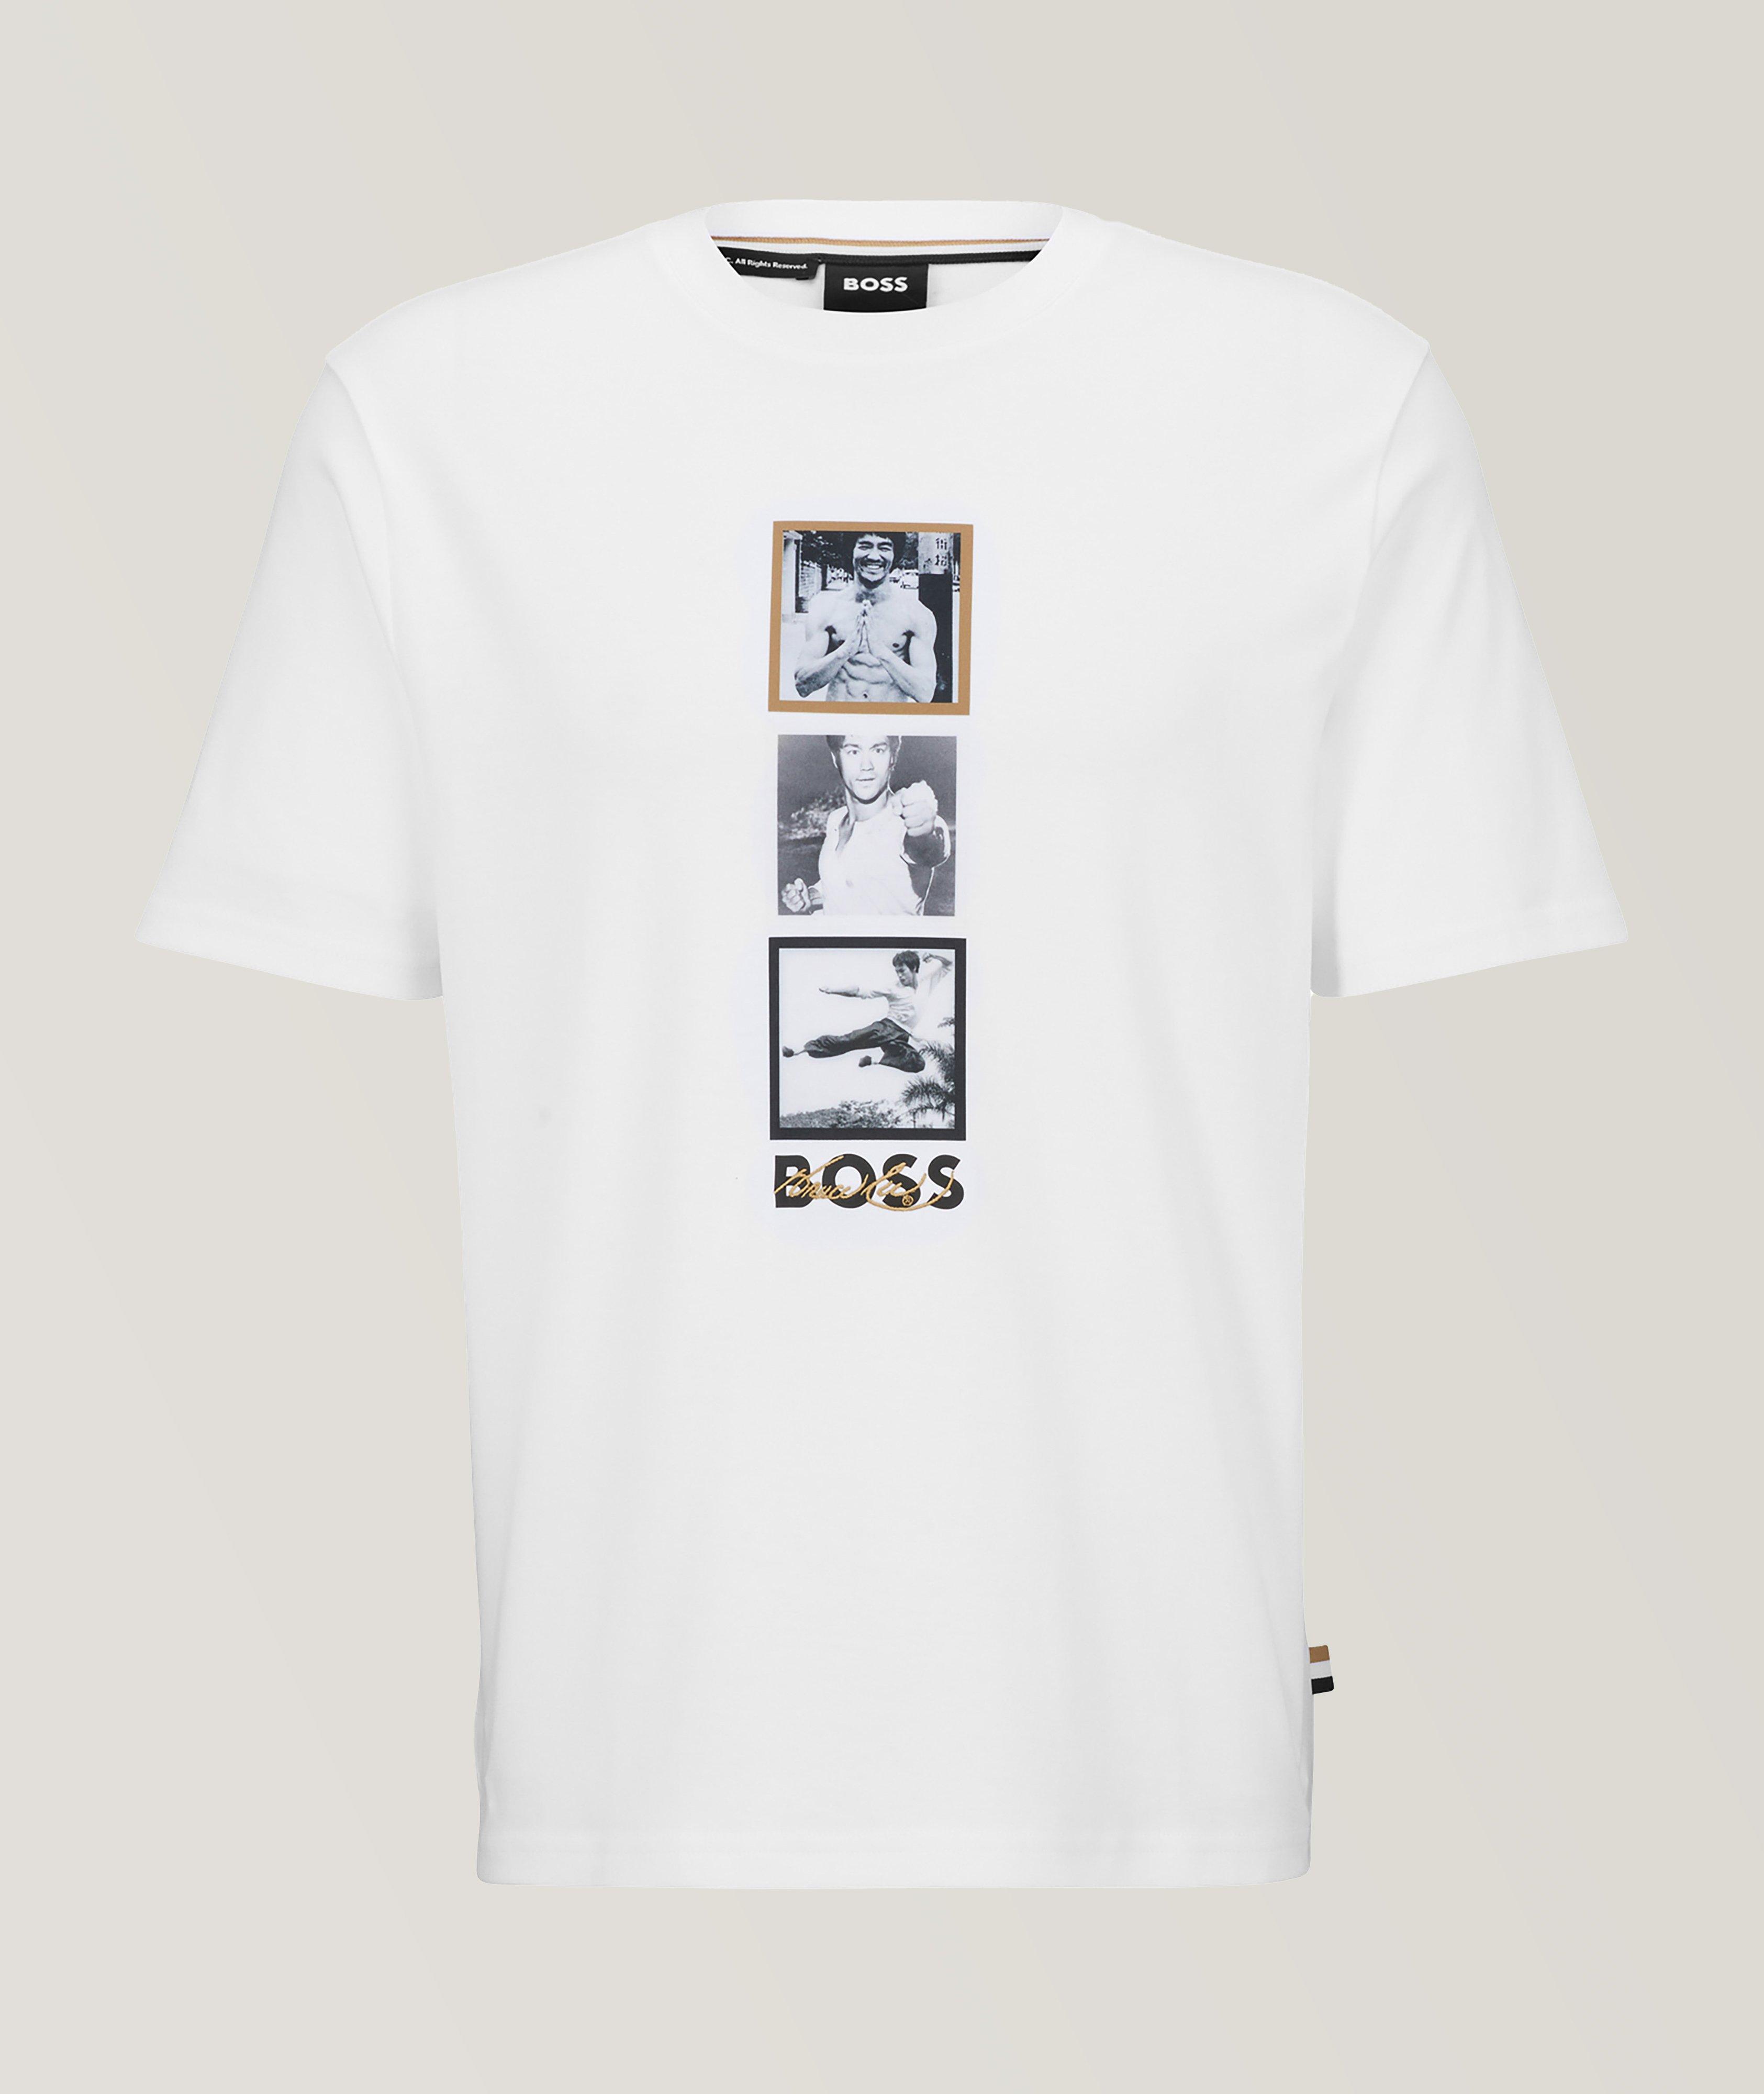 BOSS Legends Bruce Lee Collection Triptych Printed T-Shirt image 0